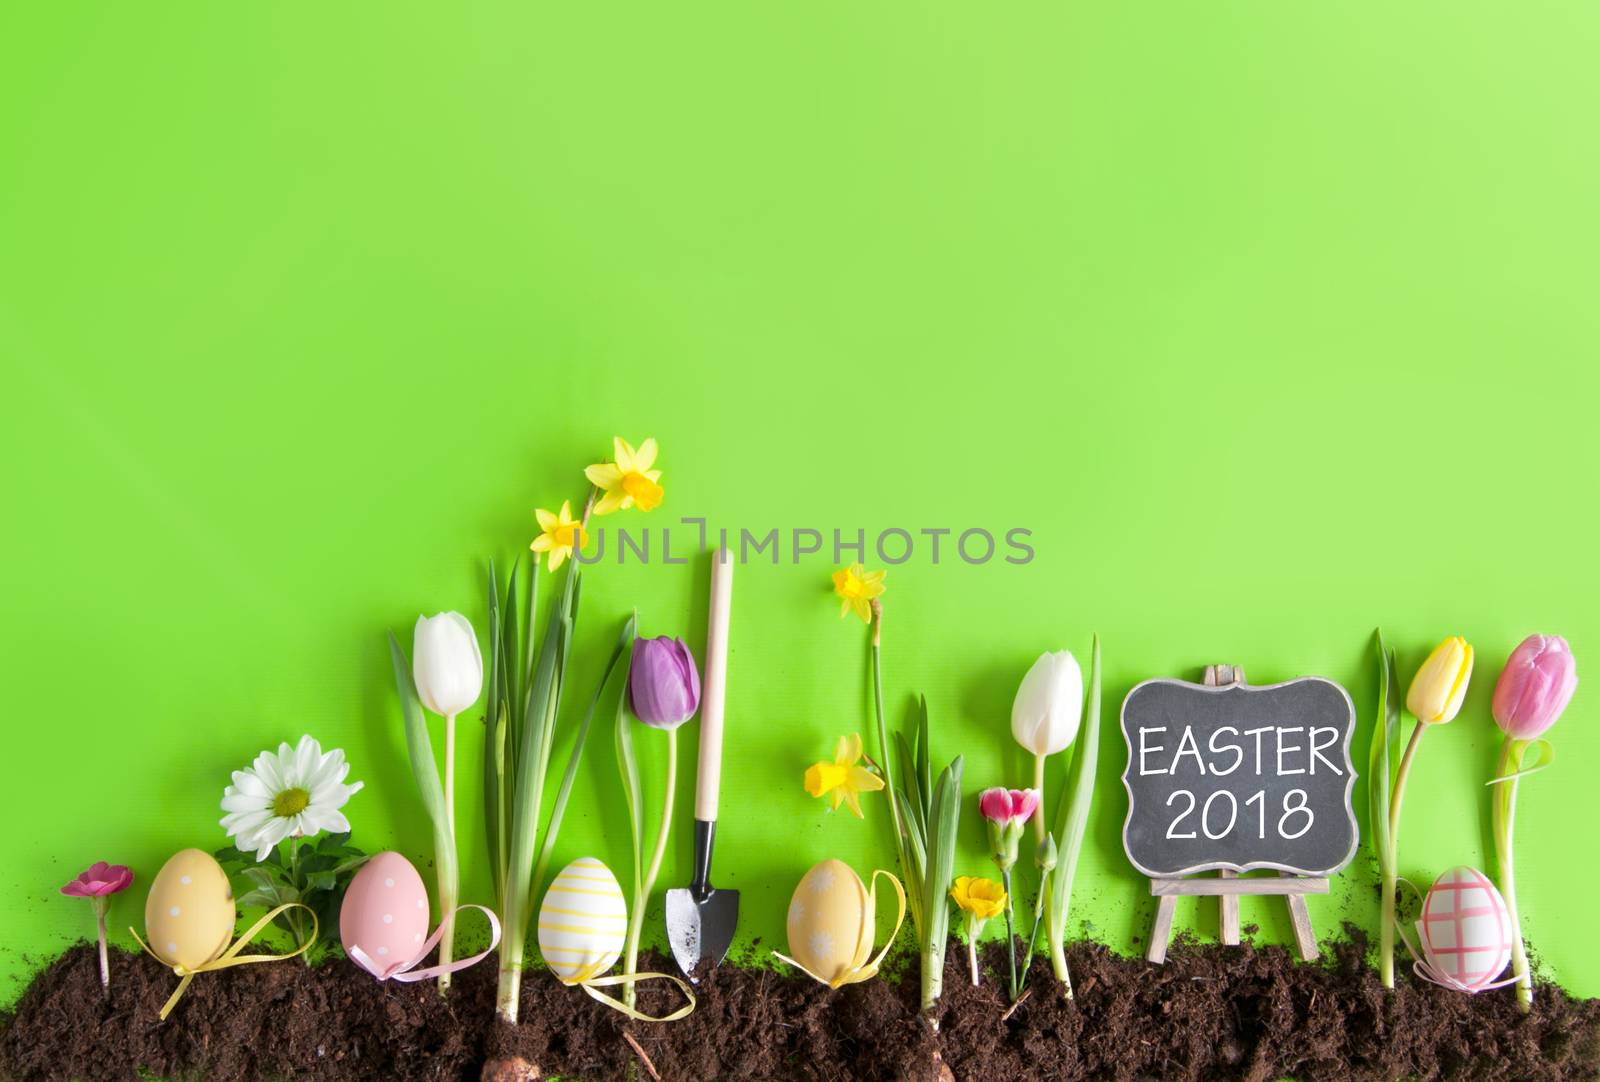 Easter flower bed garden background with row of painted eggs amongst flowers